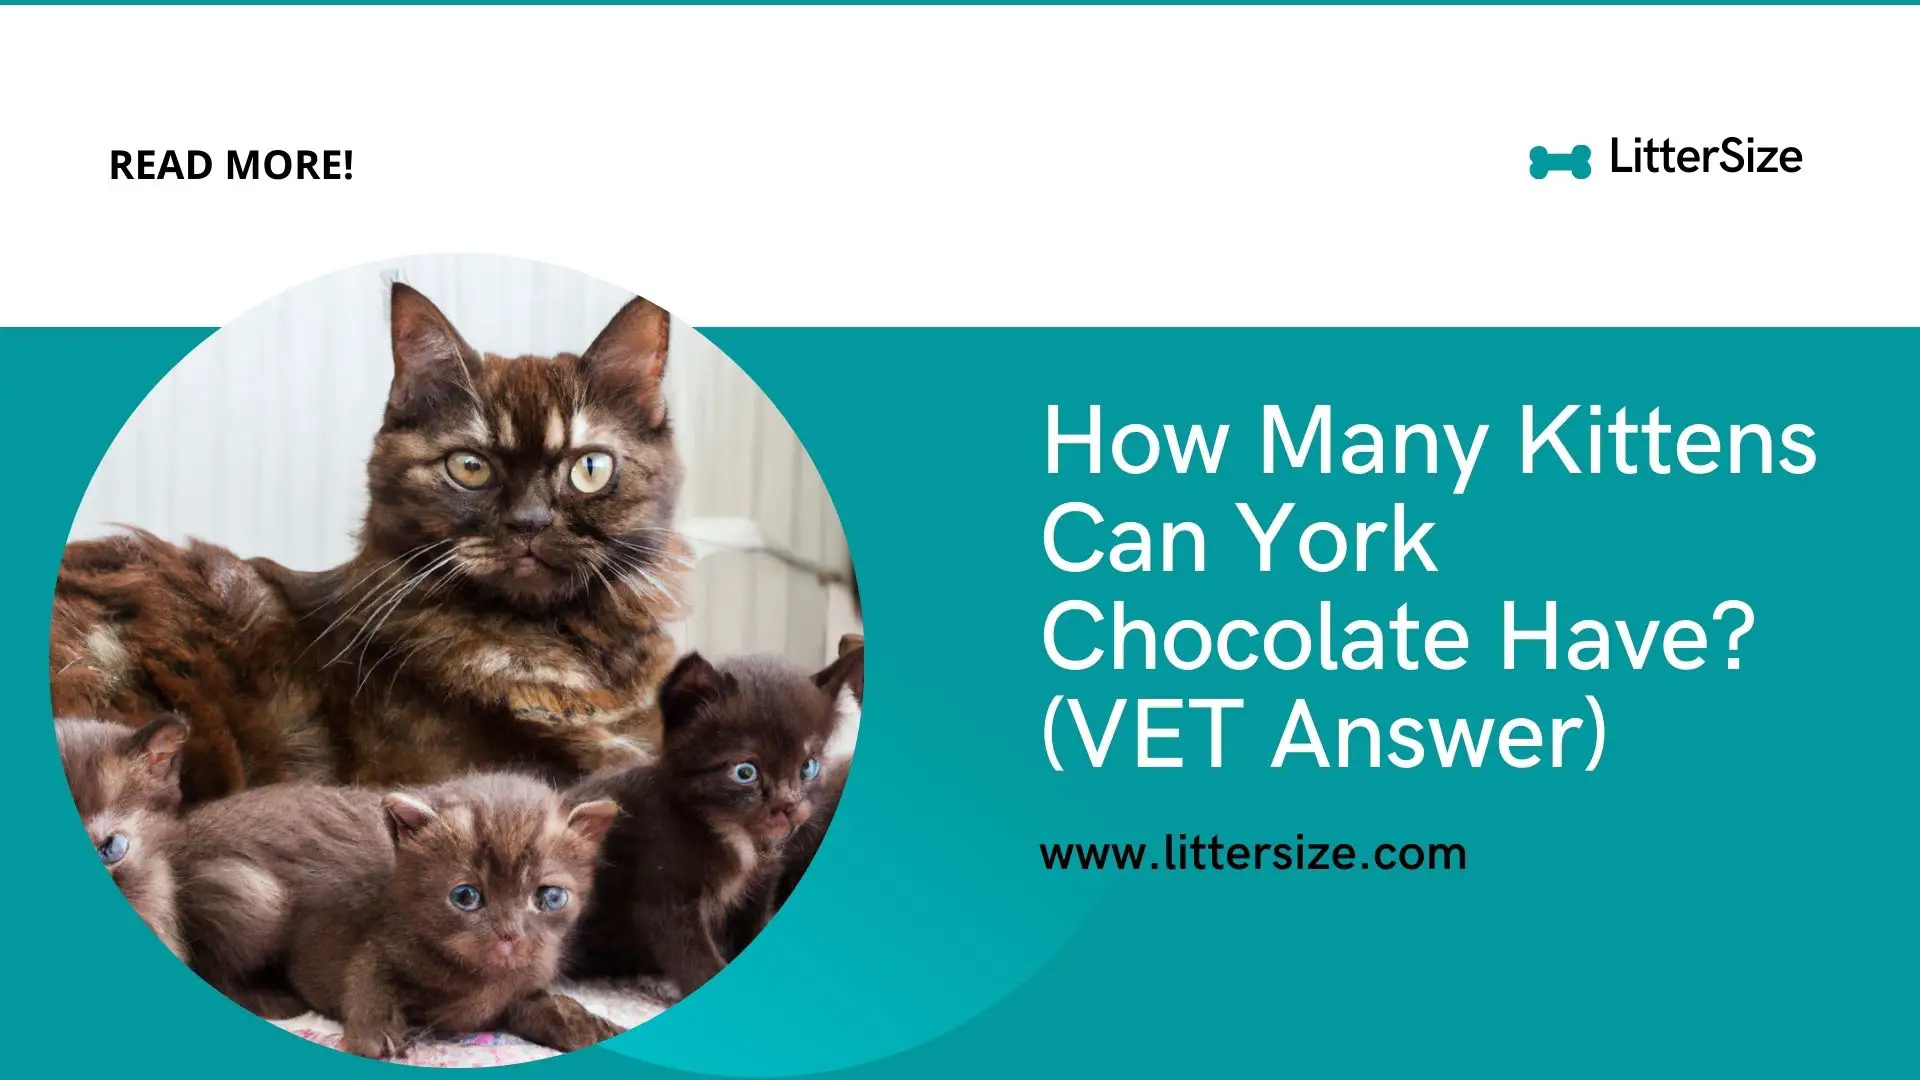 How Many Kittens Can York Chocolate Have? (VET Answer)